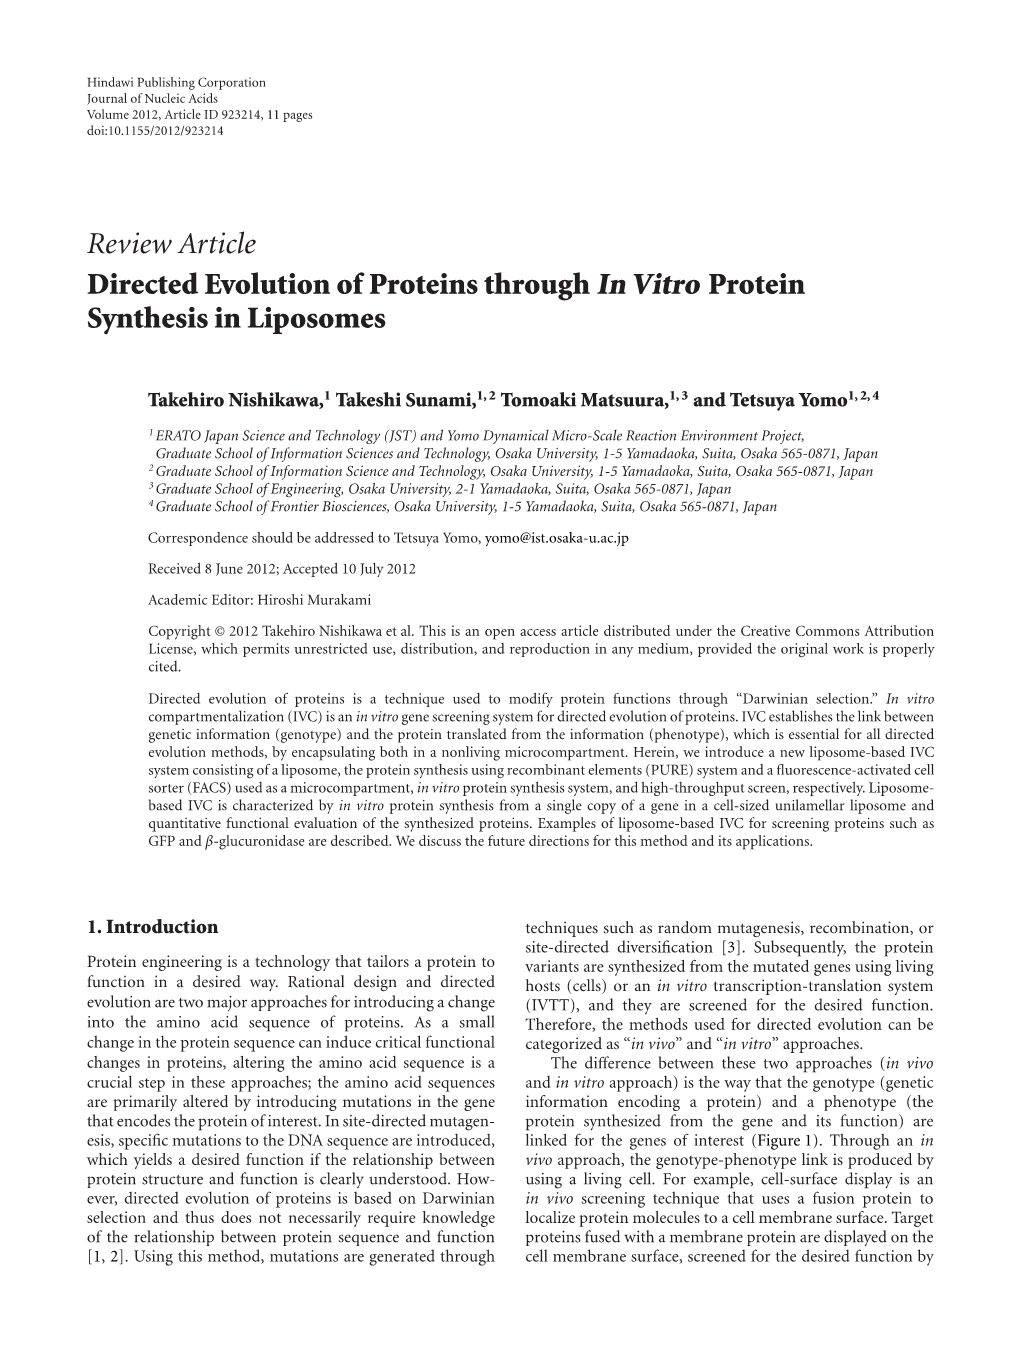 Review Article Directed Evolution of Proteins Through in Vitro Protein Synthesis in Liposomes